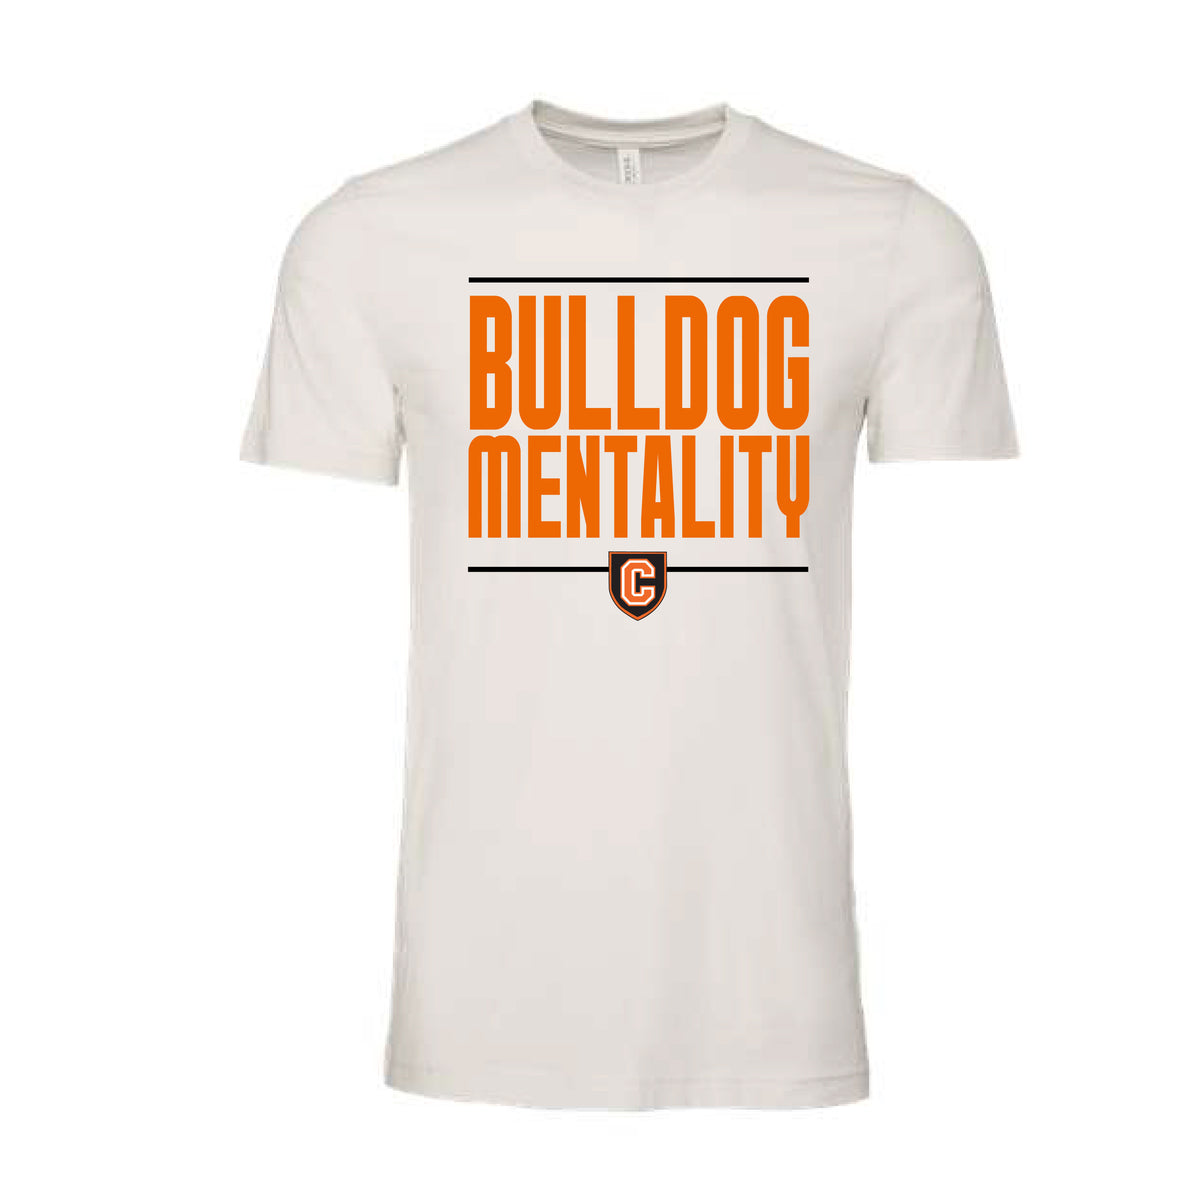 Graphic T-shirt collegiate in appearance displaying words "Bulldog Mentality" in orange font